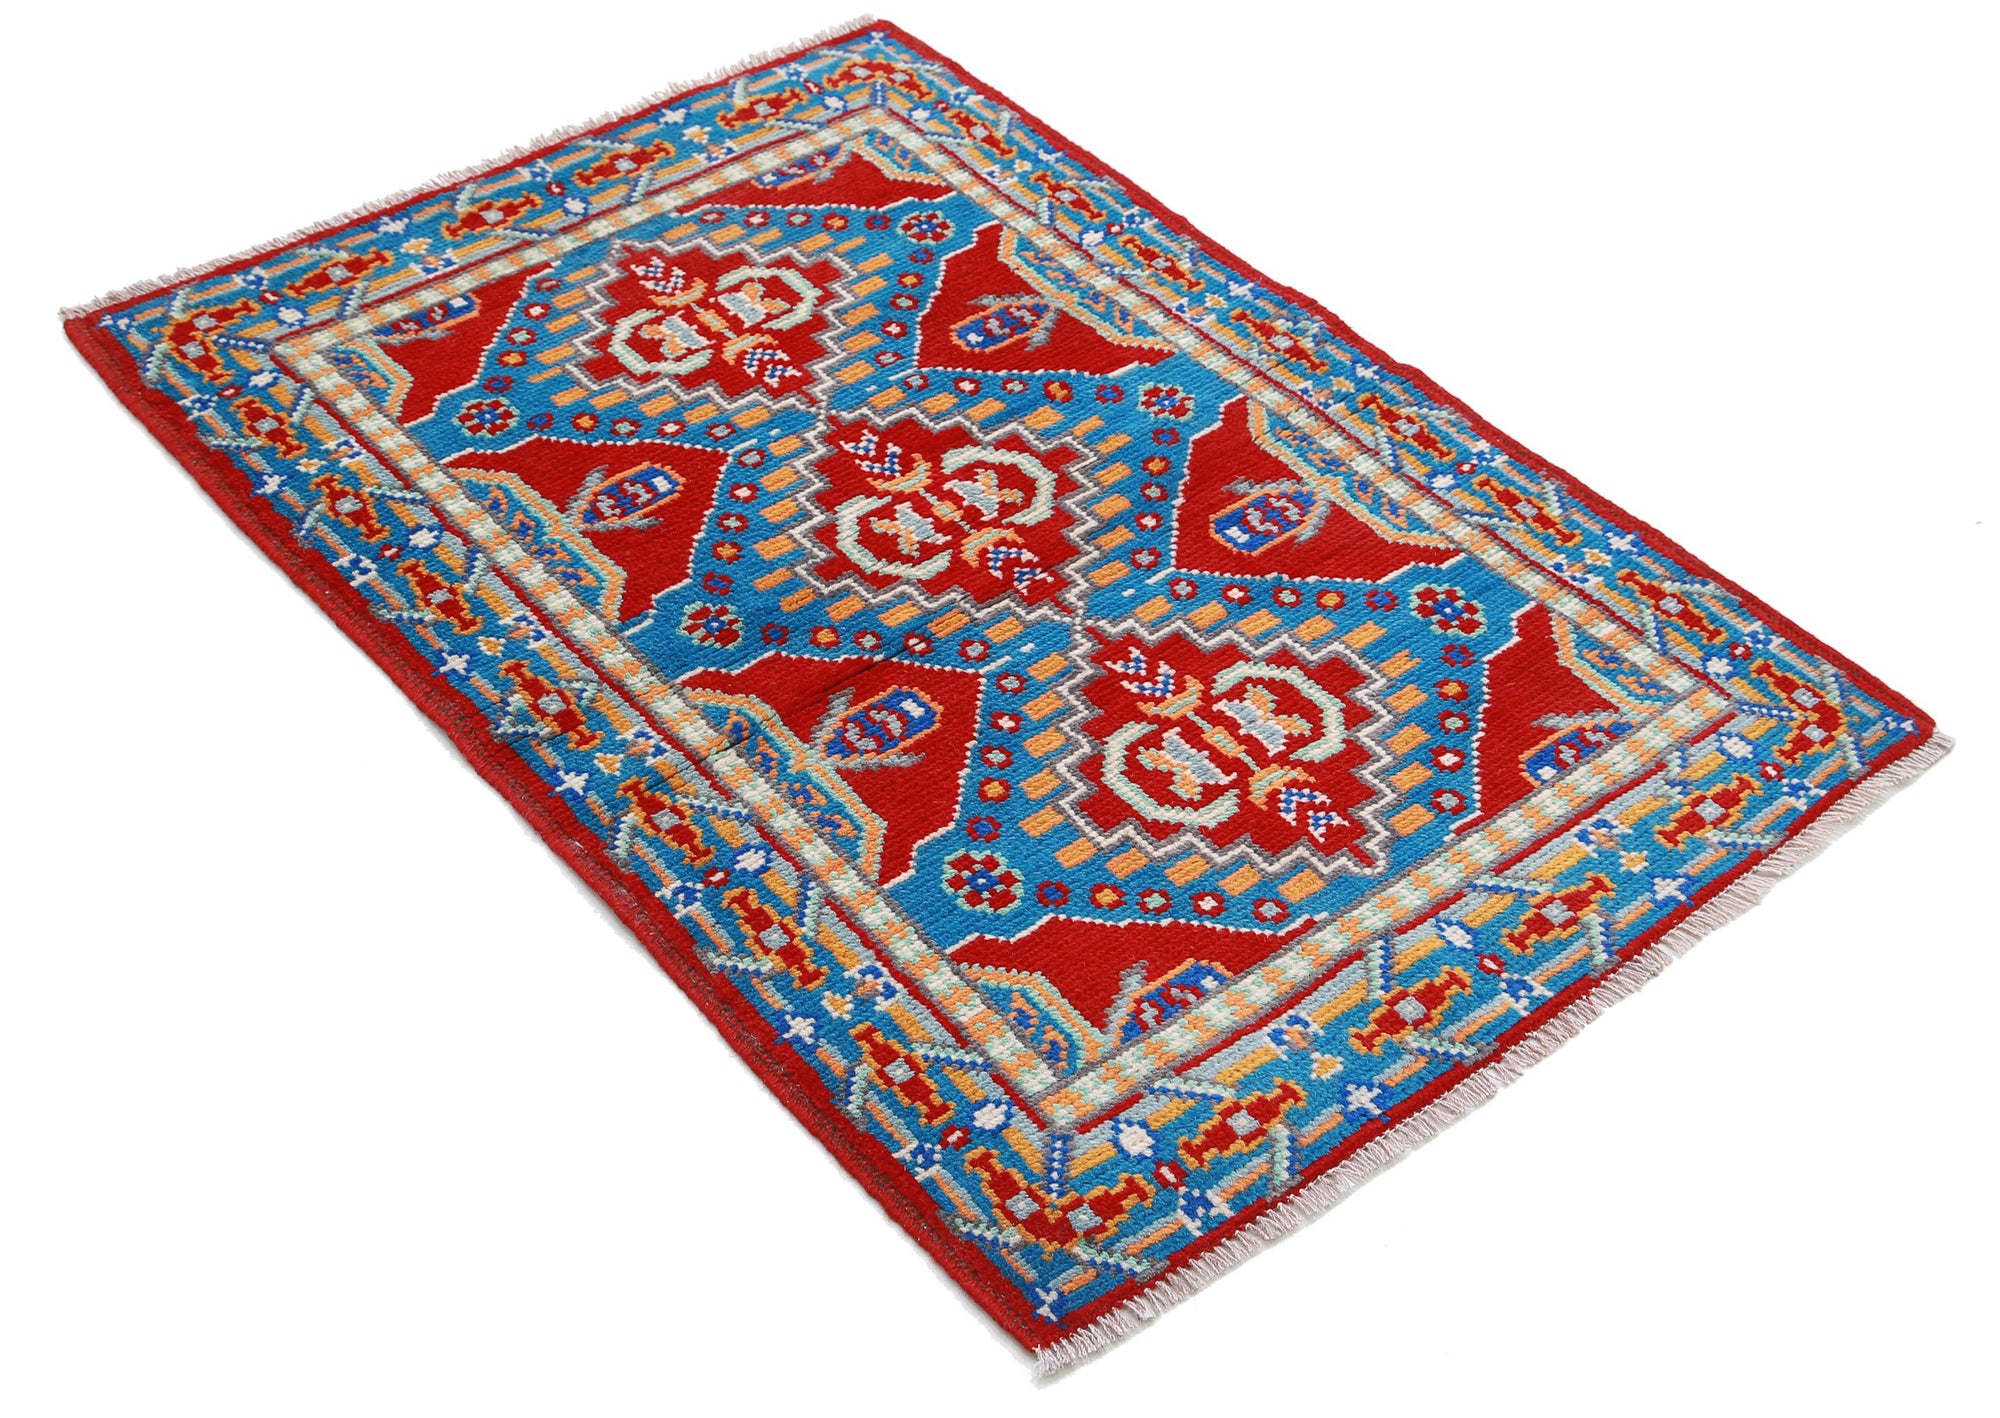 Revival-hand-knotted-qarghani-wool-rug-5014194-1.jpg